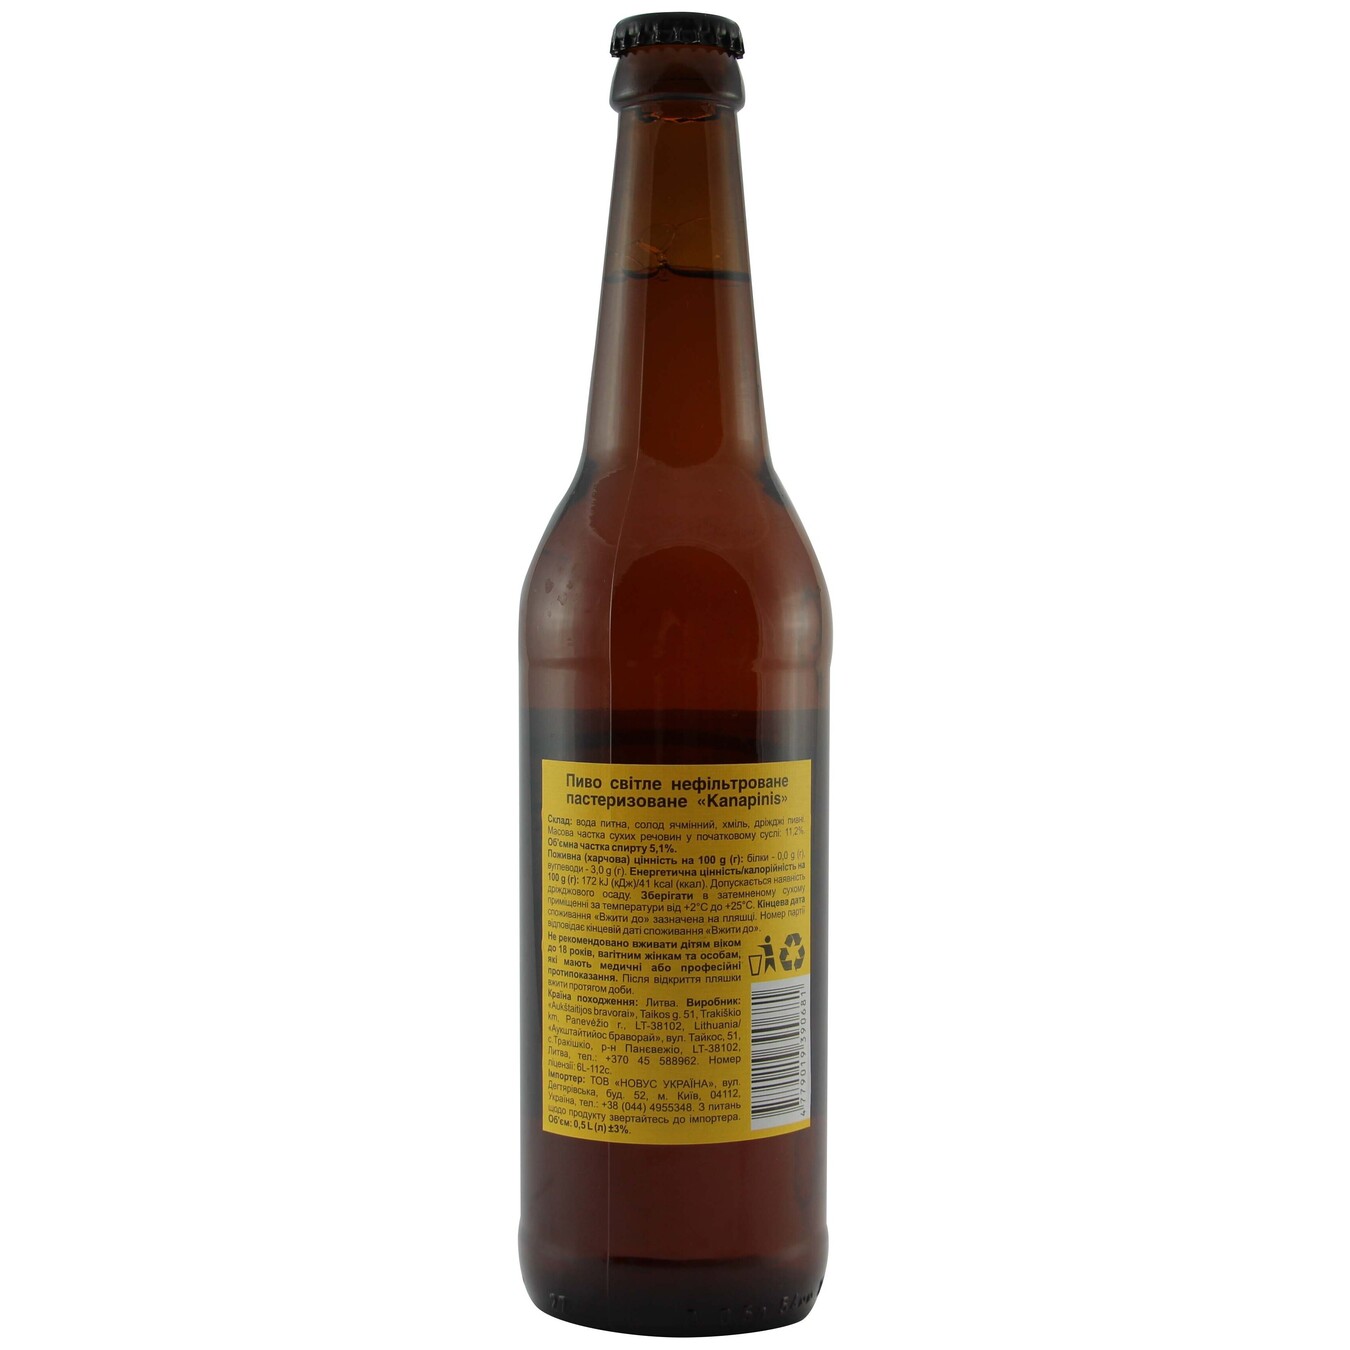 Kanapinis unfiltered light beer 5,1% 0,5l 2